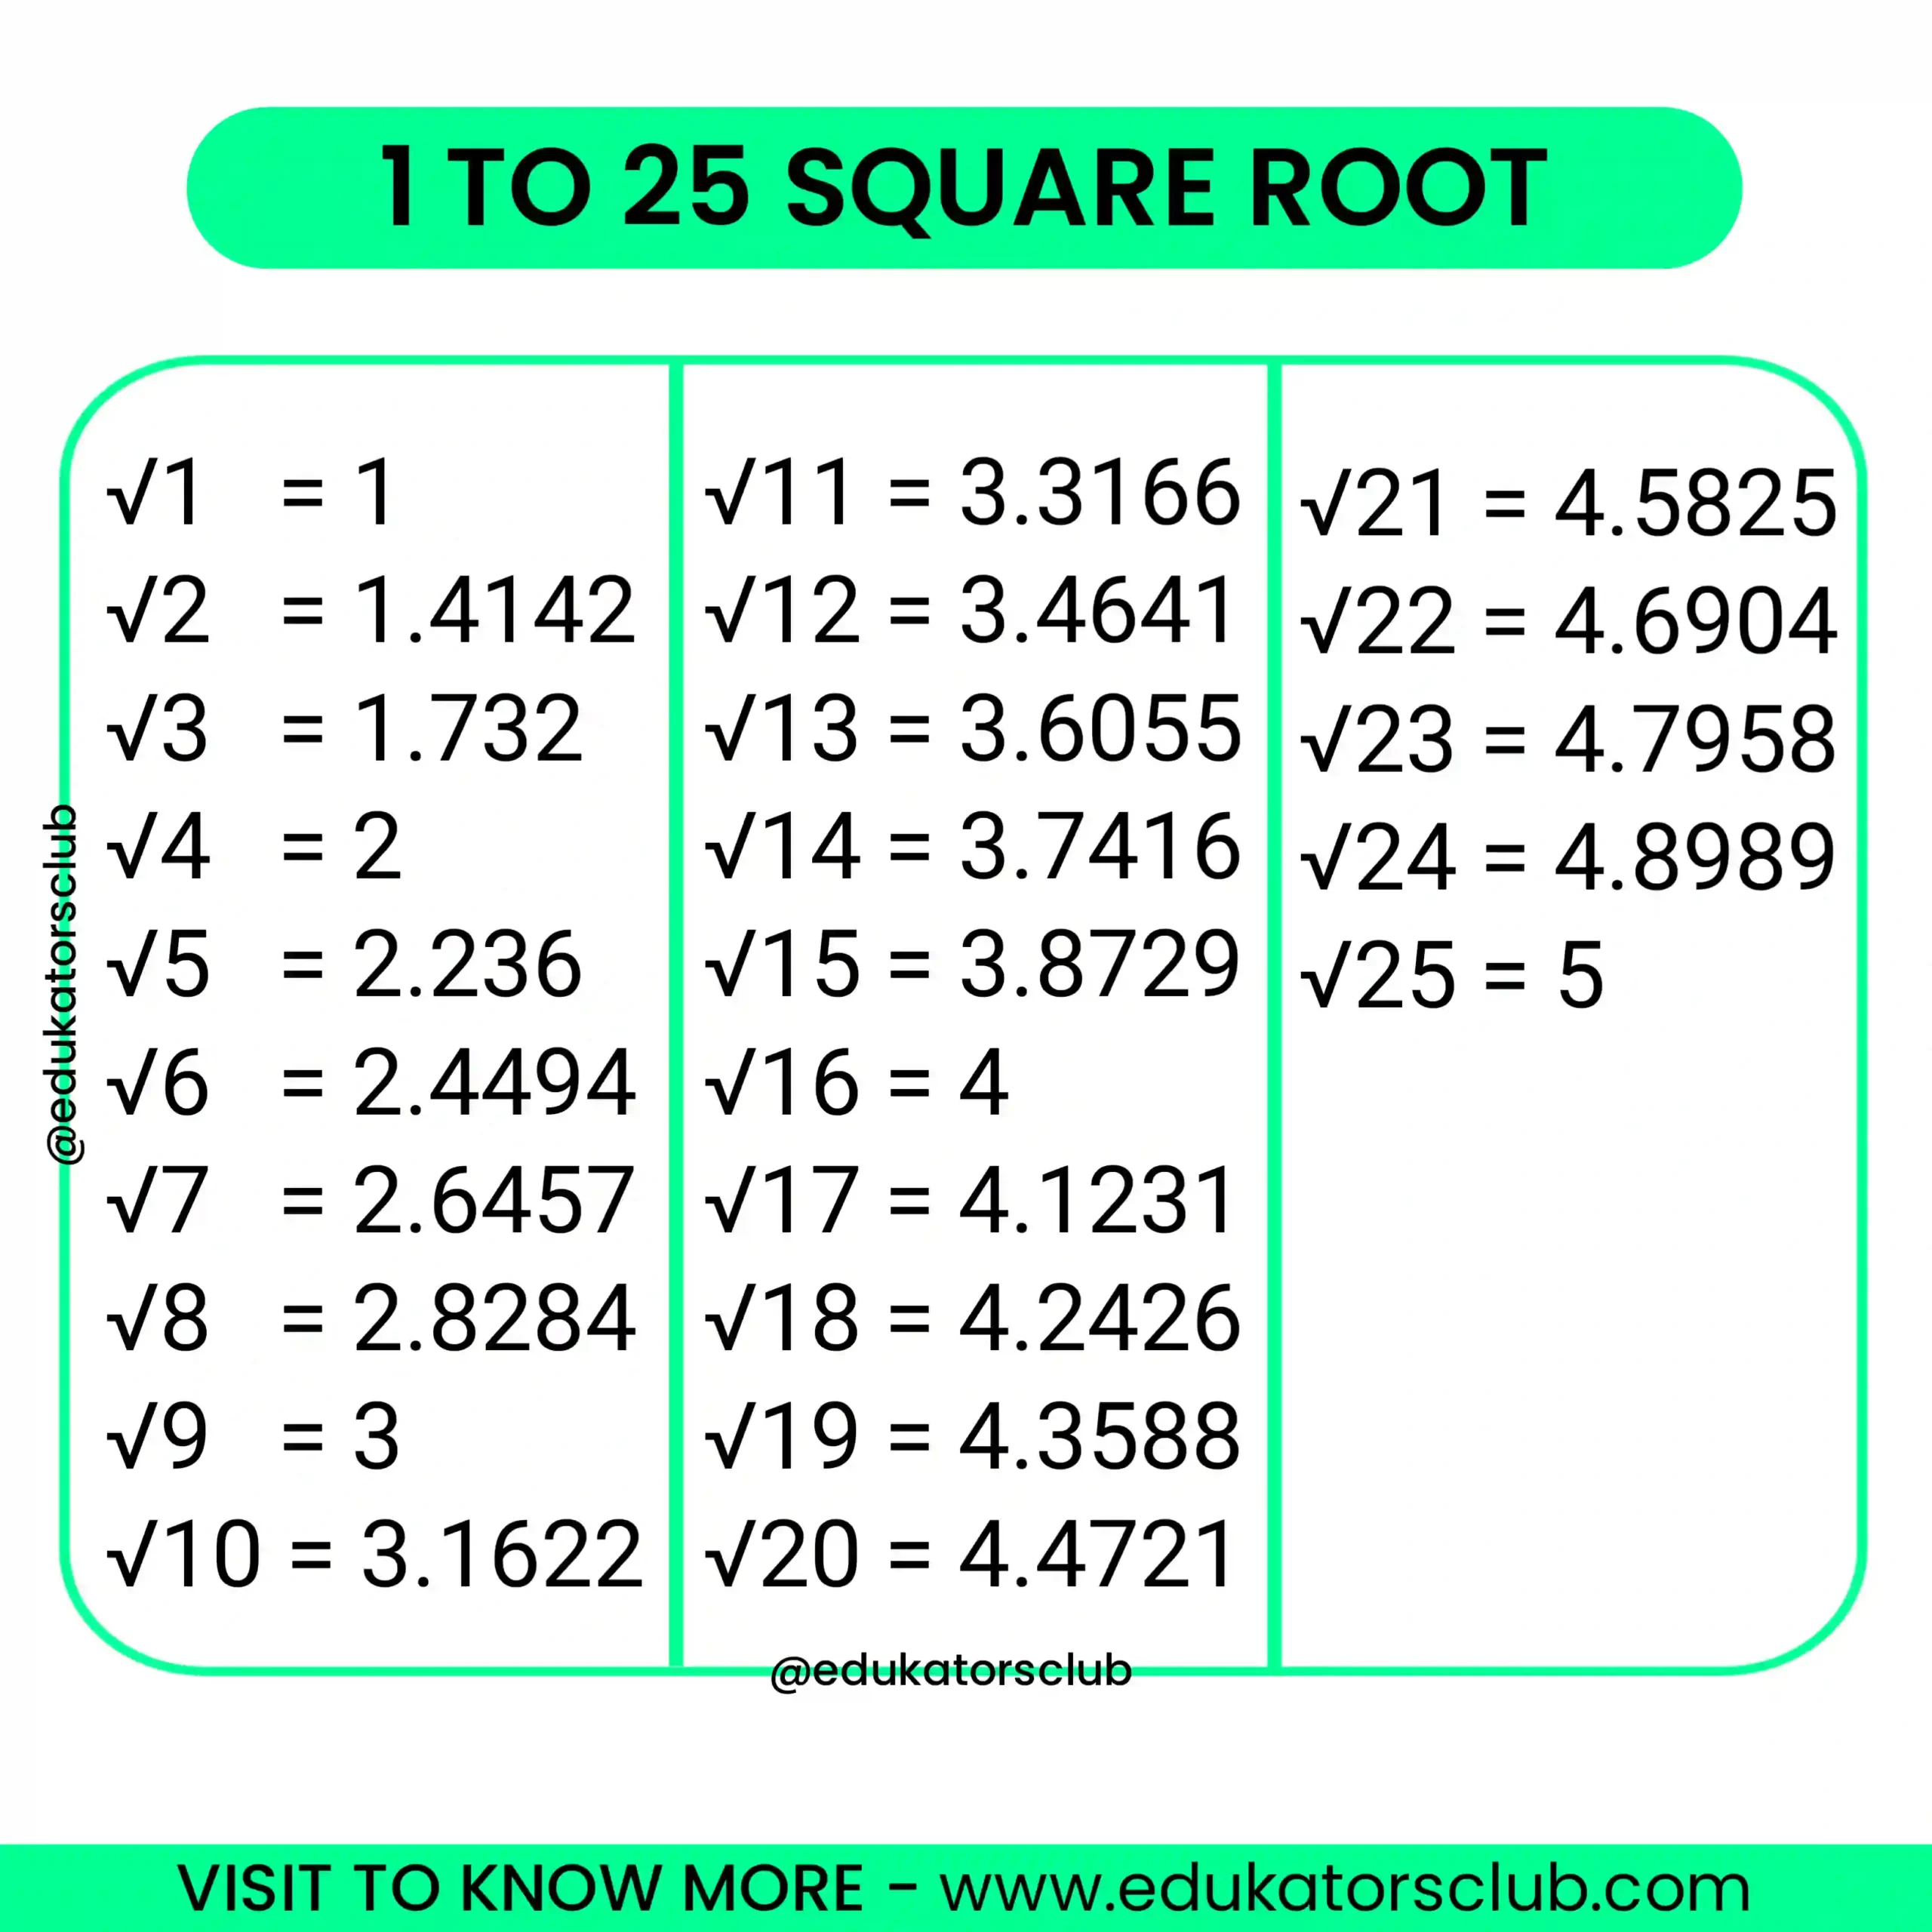 1 To 25 Square Root Scaled.webp